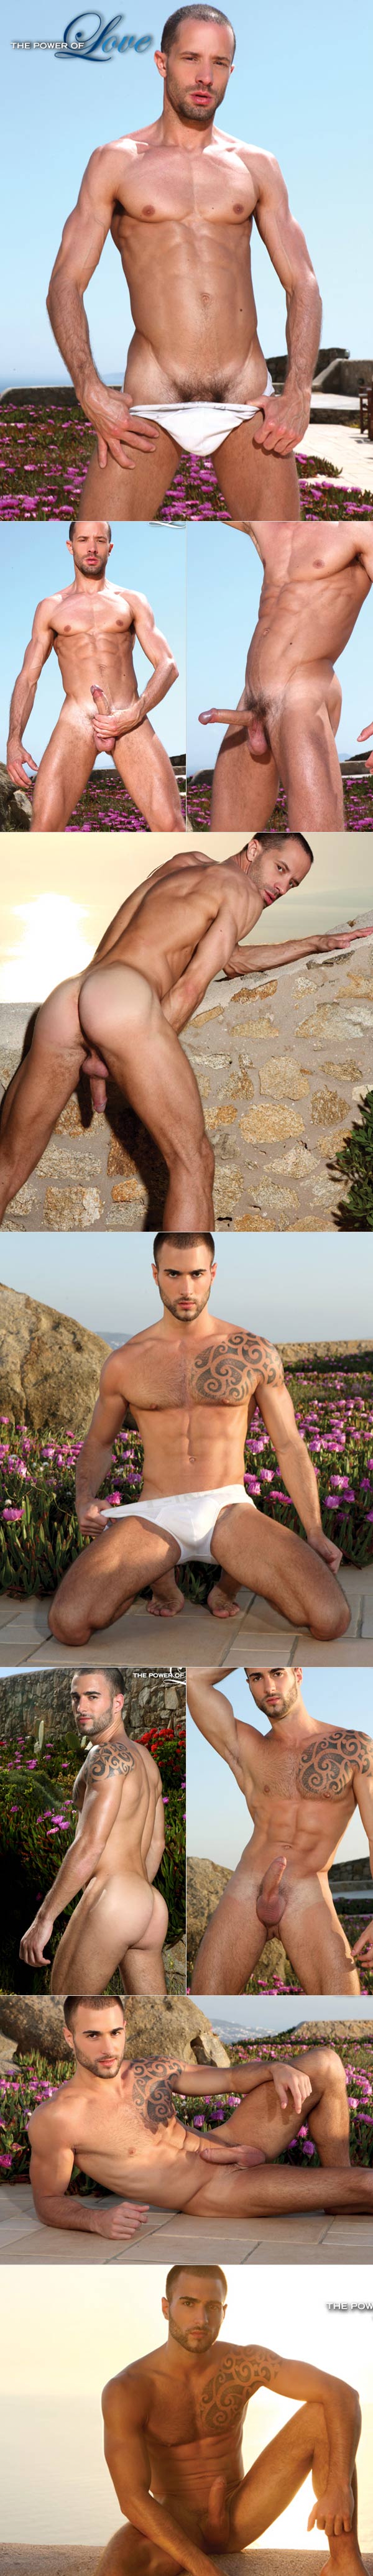 The Power of Love (Will Helm & Tony Axel) at LucasEntertainment.com